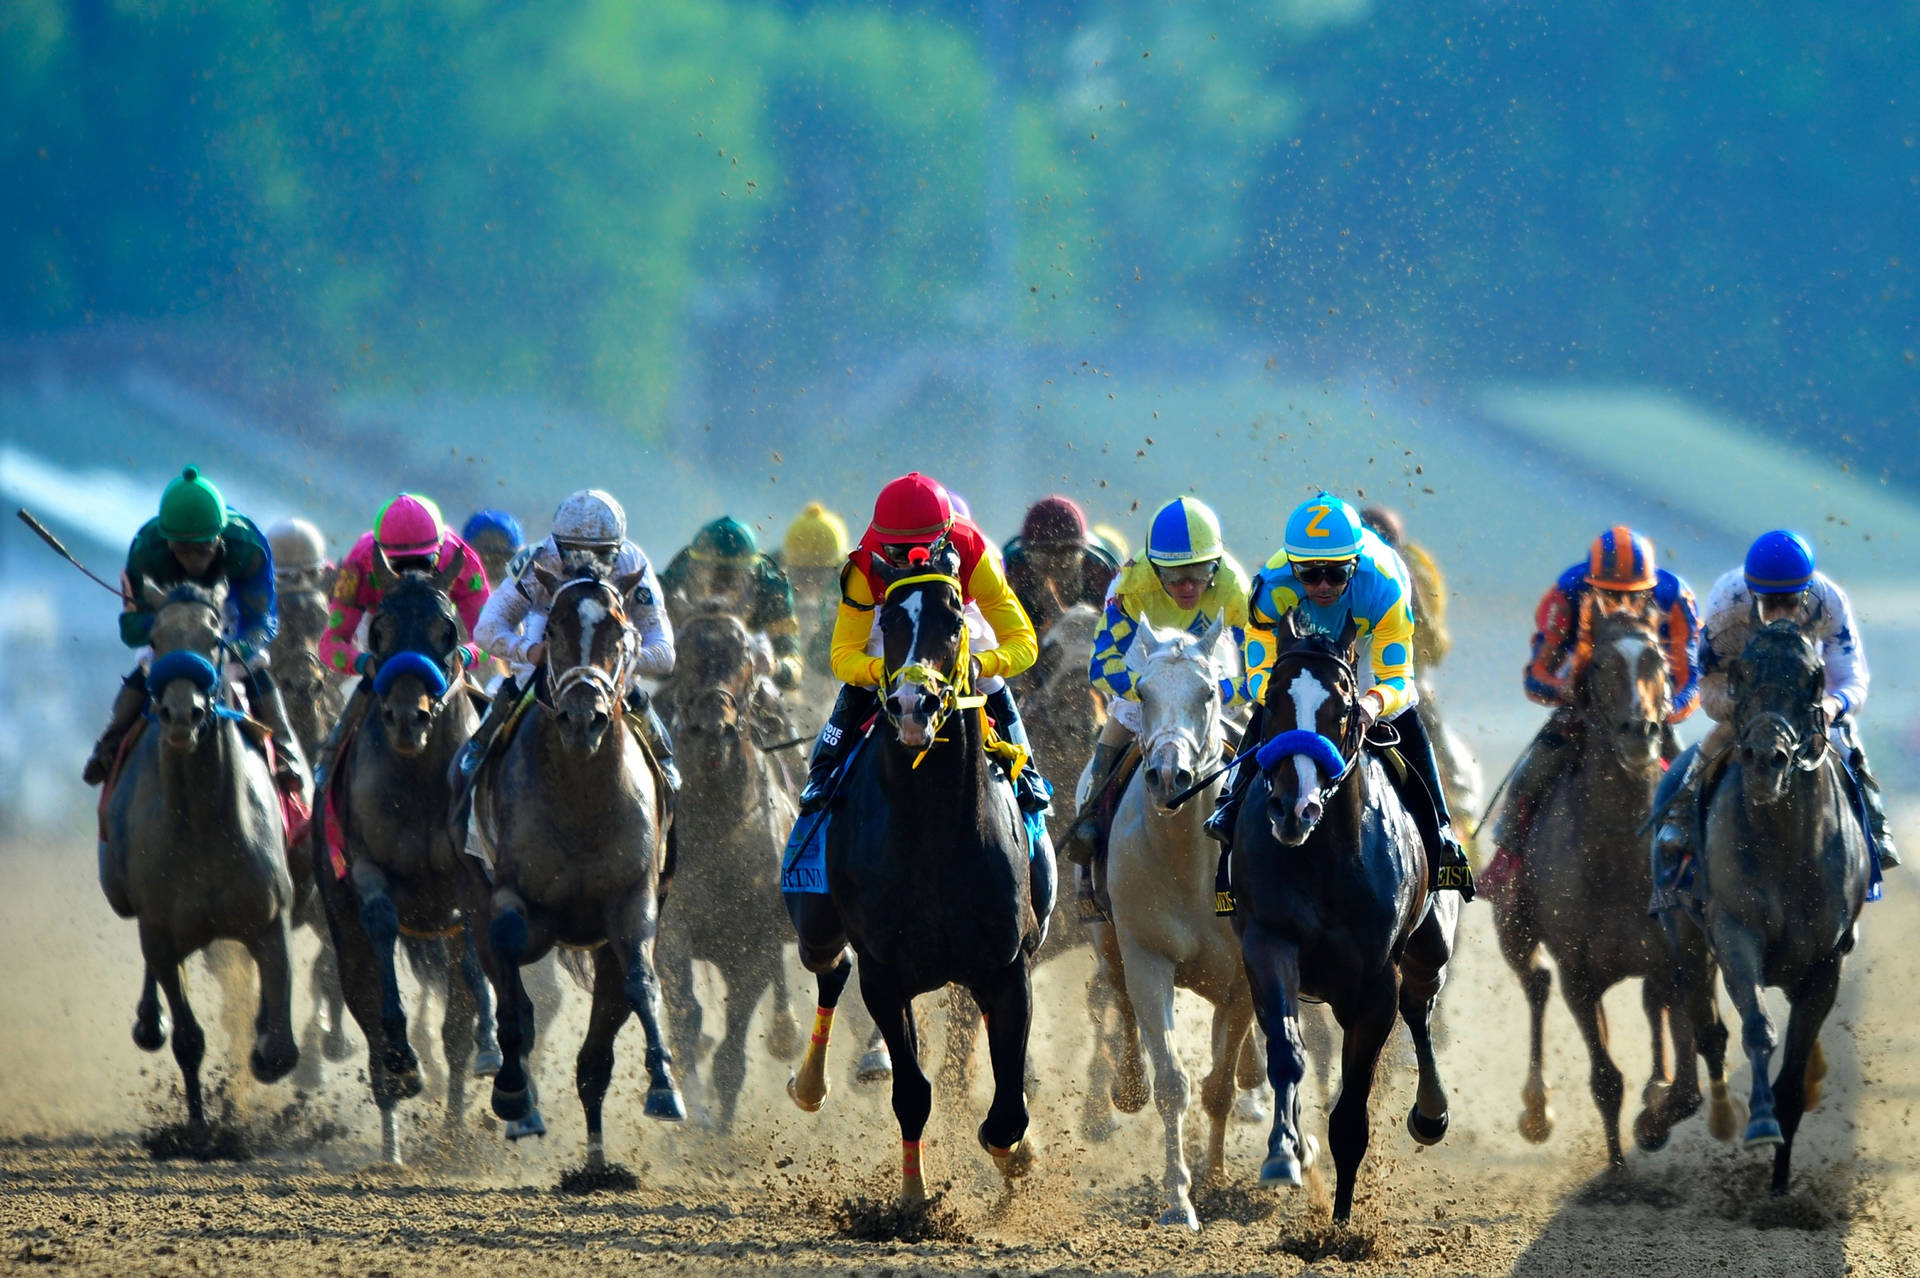 Excitement at the Run for the Roses - The Kentucky Derby Wallpaper